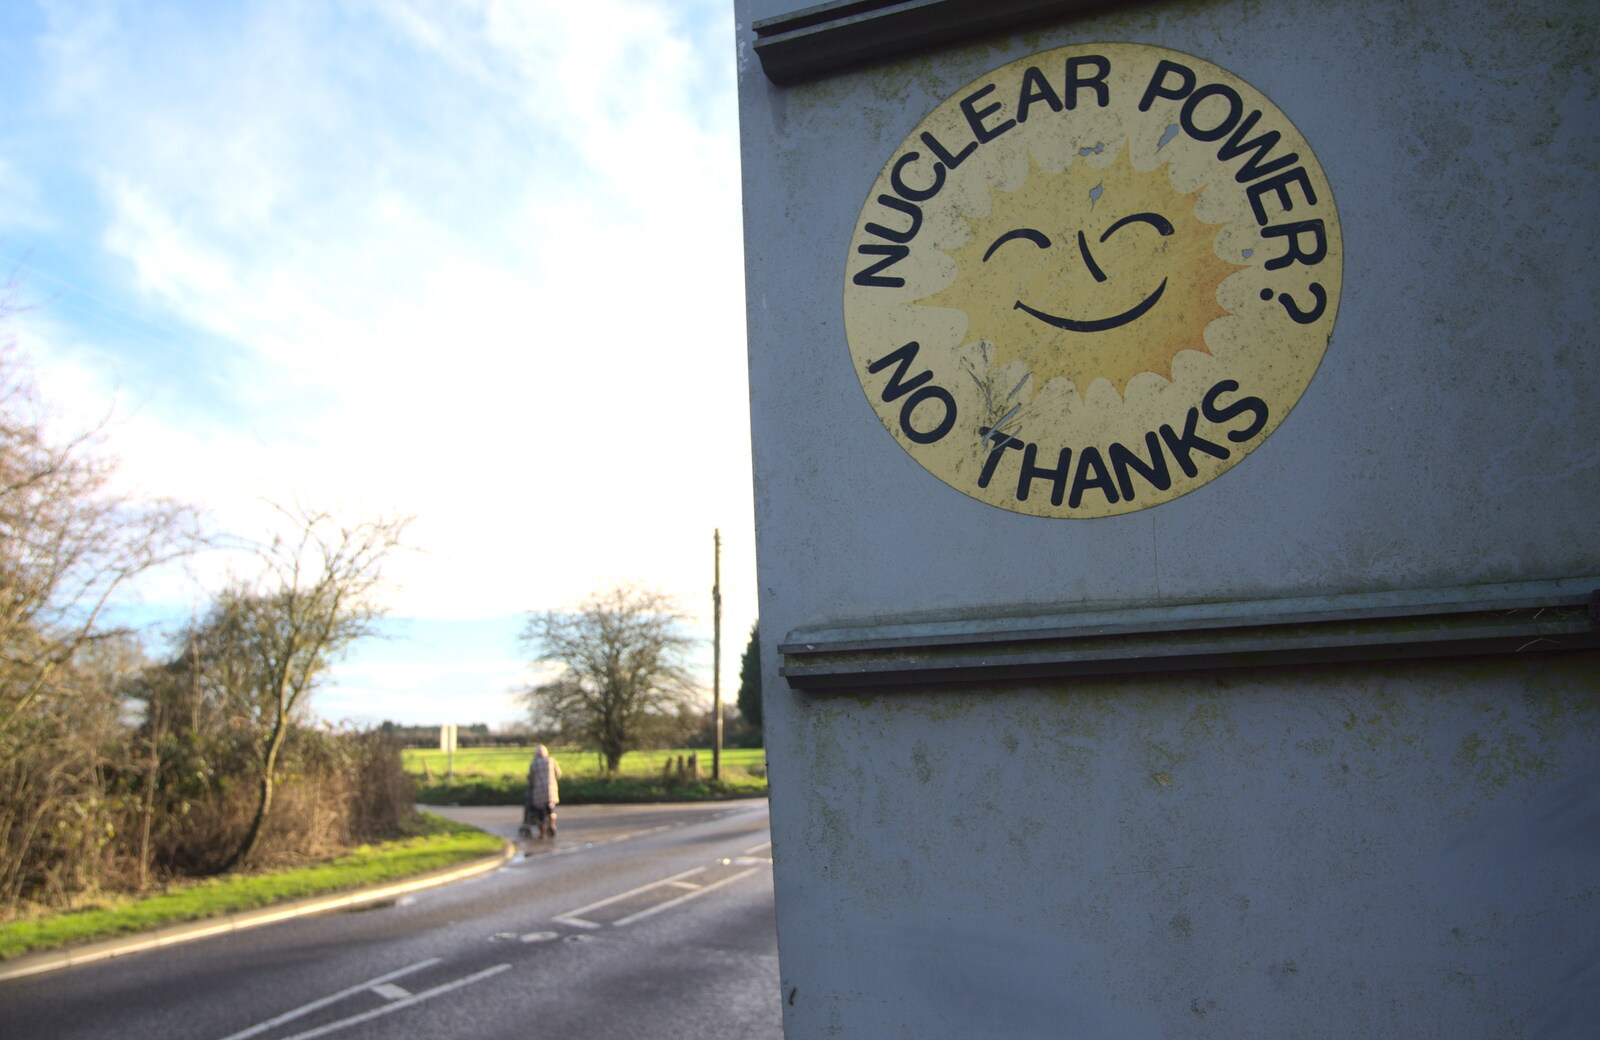 An 80s sign: Nuclear Power? No Thanks from Christmas Day and all that, Brome, Suffolk - 25th December 2013